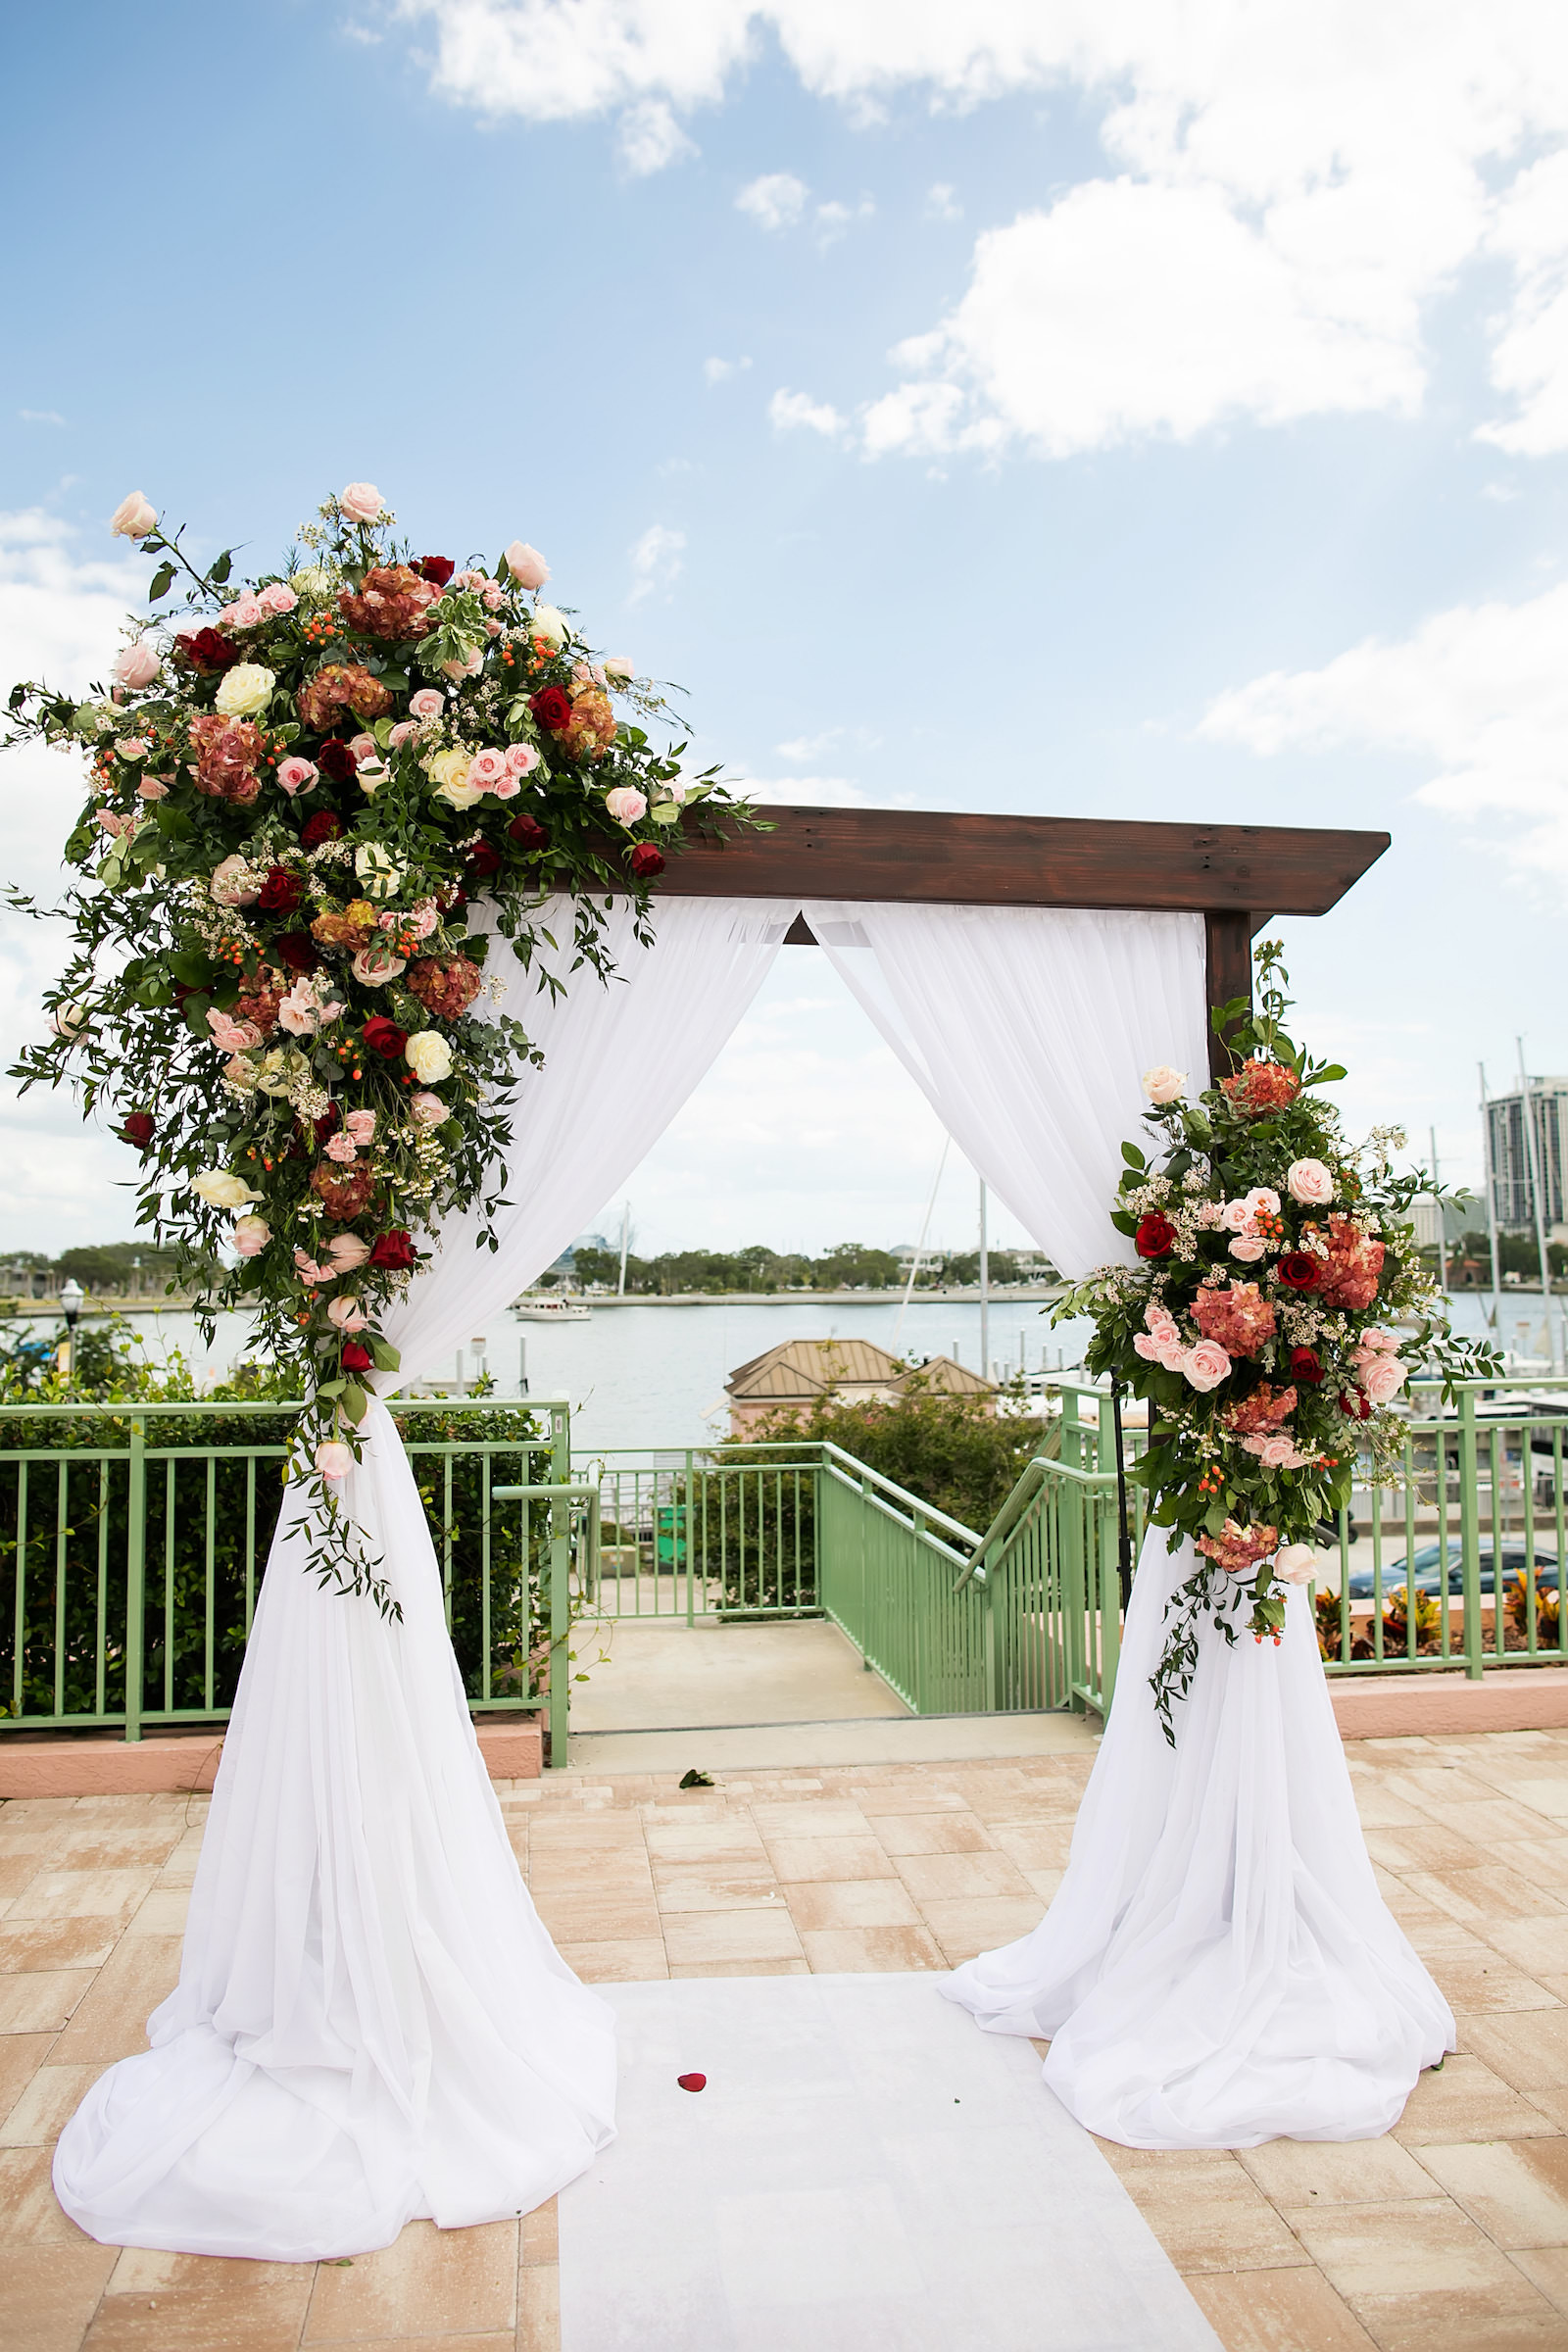 Elegant Garden Wedding Ceremony Decor, Wooden Arch with Lush Burgundy and Pink Floral Arrangements and White Linen Draping | Tampa Bay Wedding Photographer Limelight Photography | Planner Breezin Weddings | Florist Lemon Drops | Rentals Outside the Box Event Rentals | Downtown St. Pete Venue The Vinoy